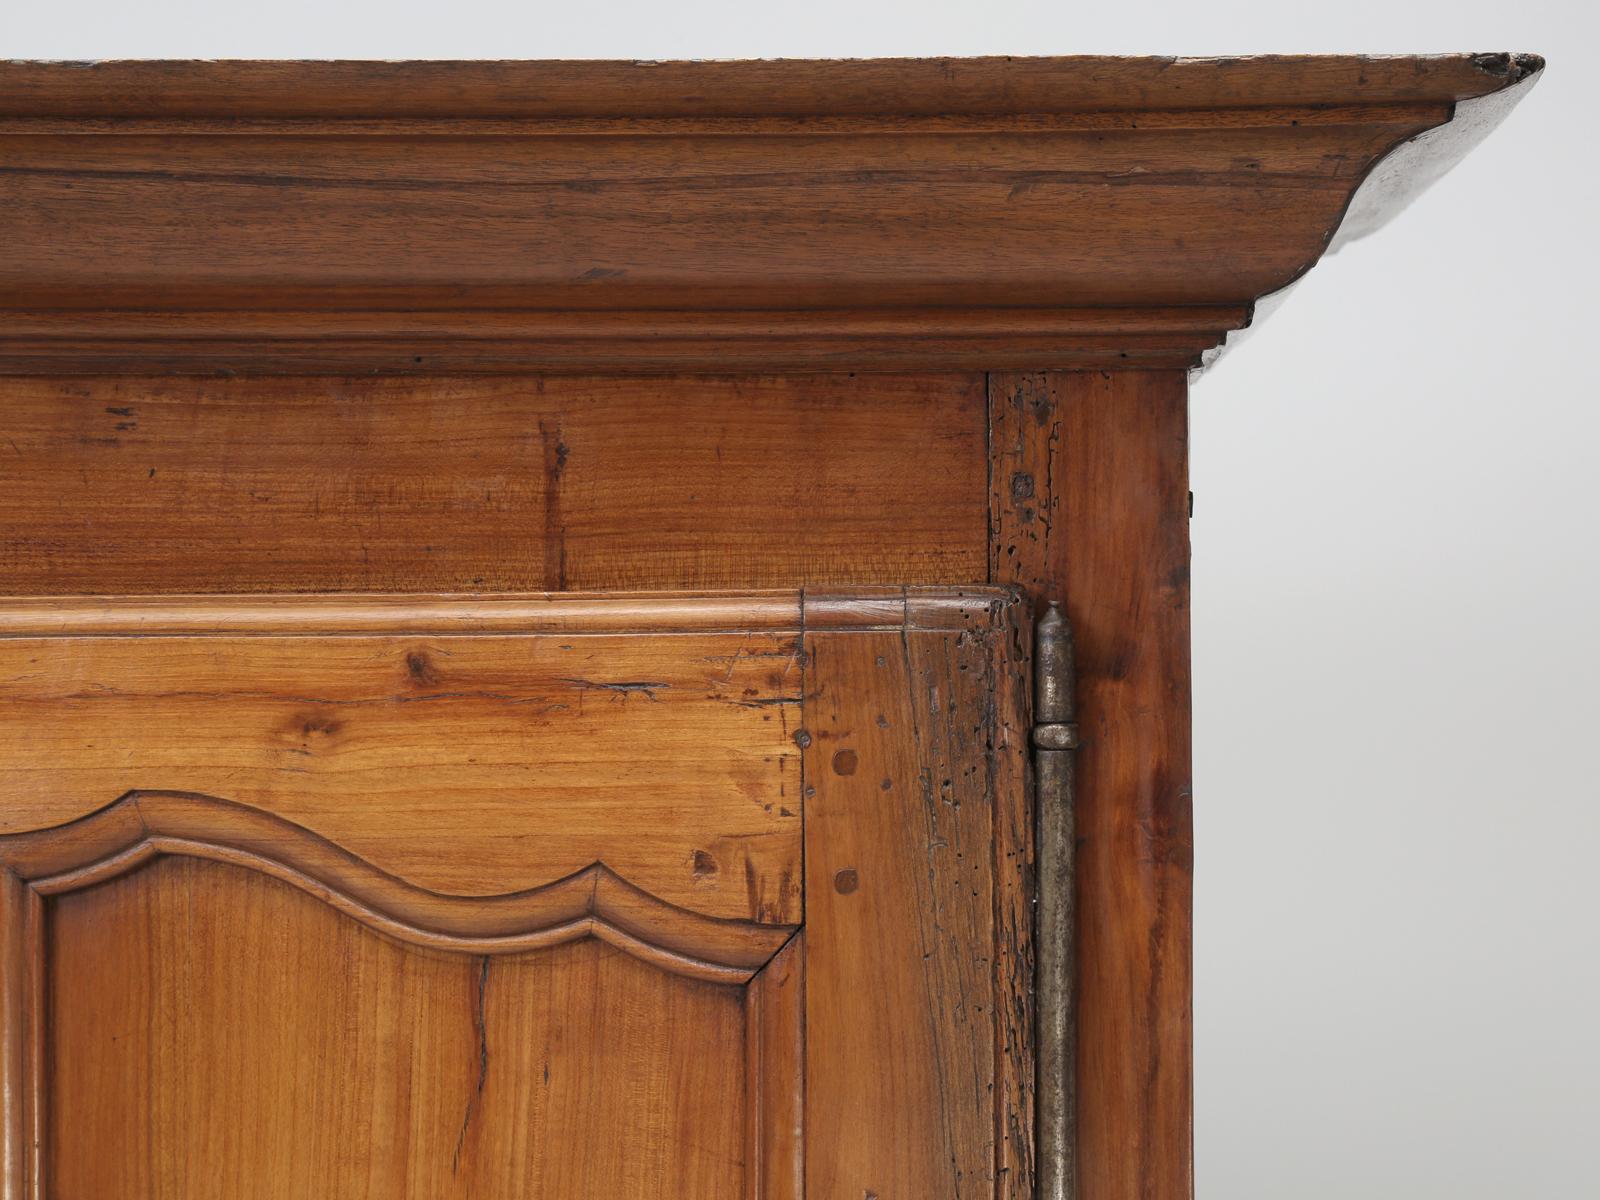 Antique French bonnetiere made from solid cherrywood and probably was constructed in the late 1700s. The cherrywood, of our bonnetiere or small armoire or cupboard, has a beautiful and natural patina to it. Both the upper and lower doors of our